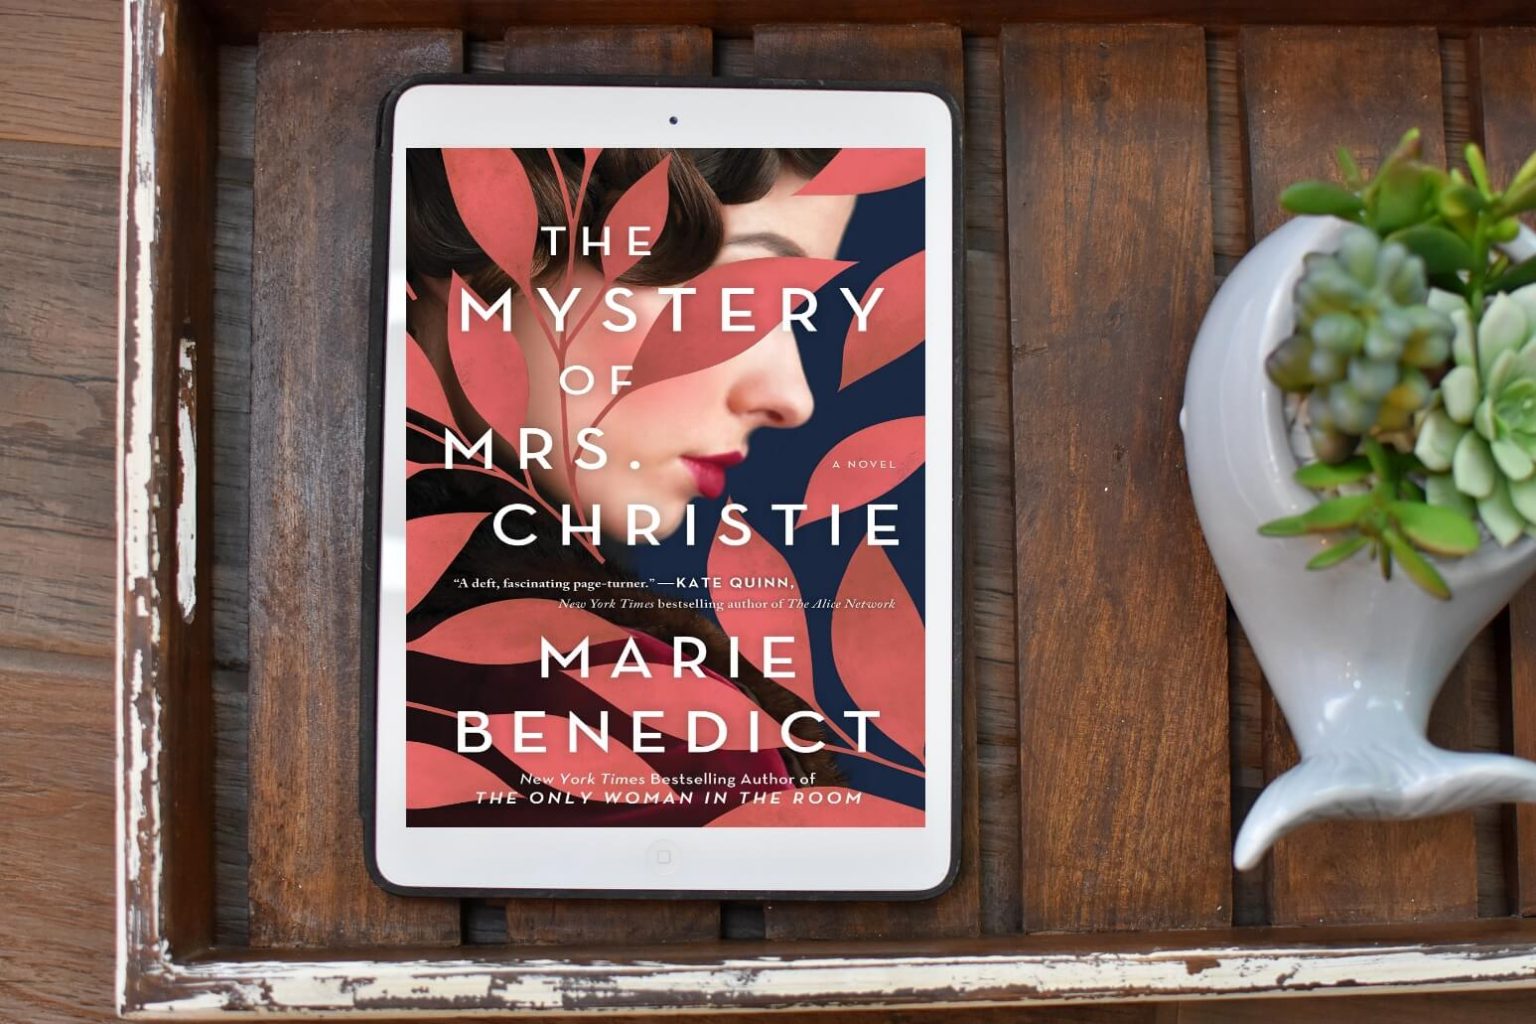 the mystery of mrs christie synopsis